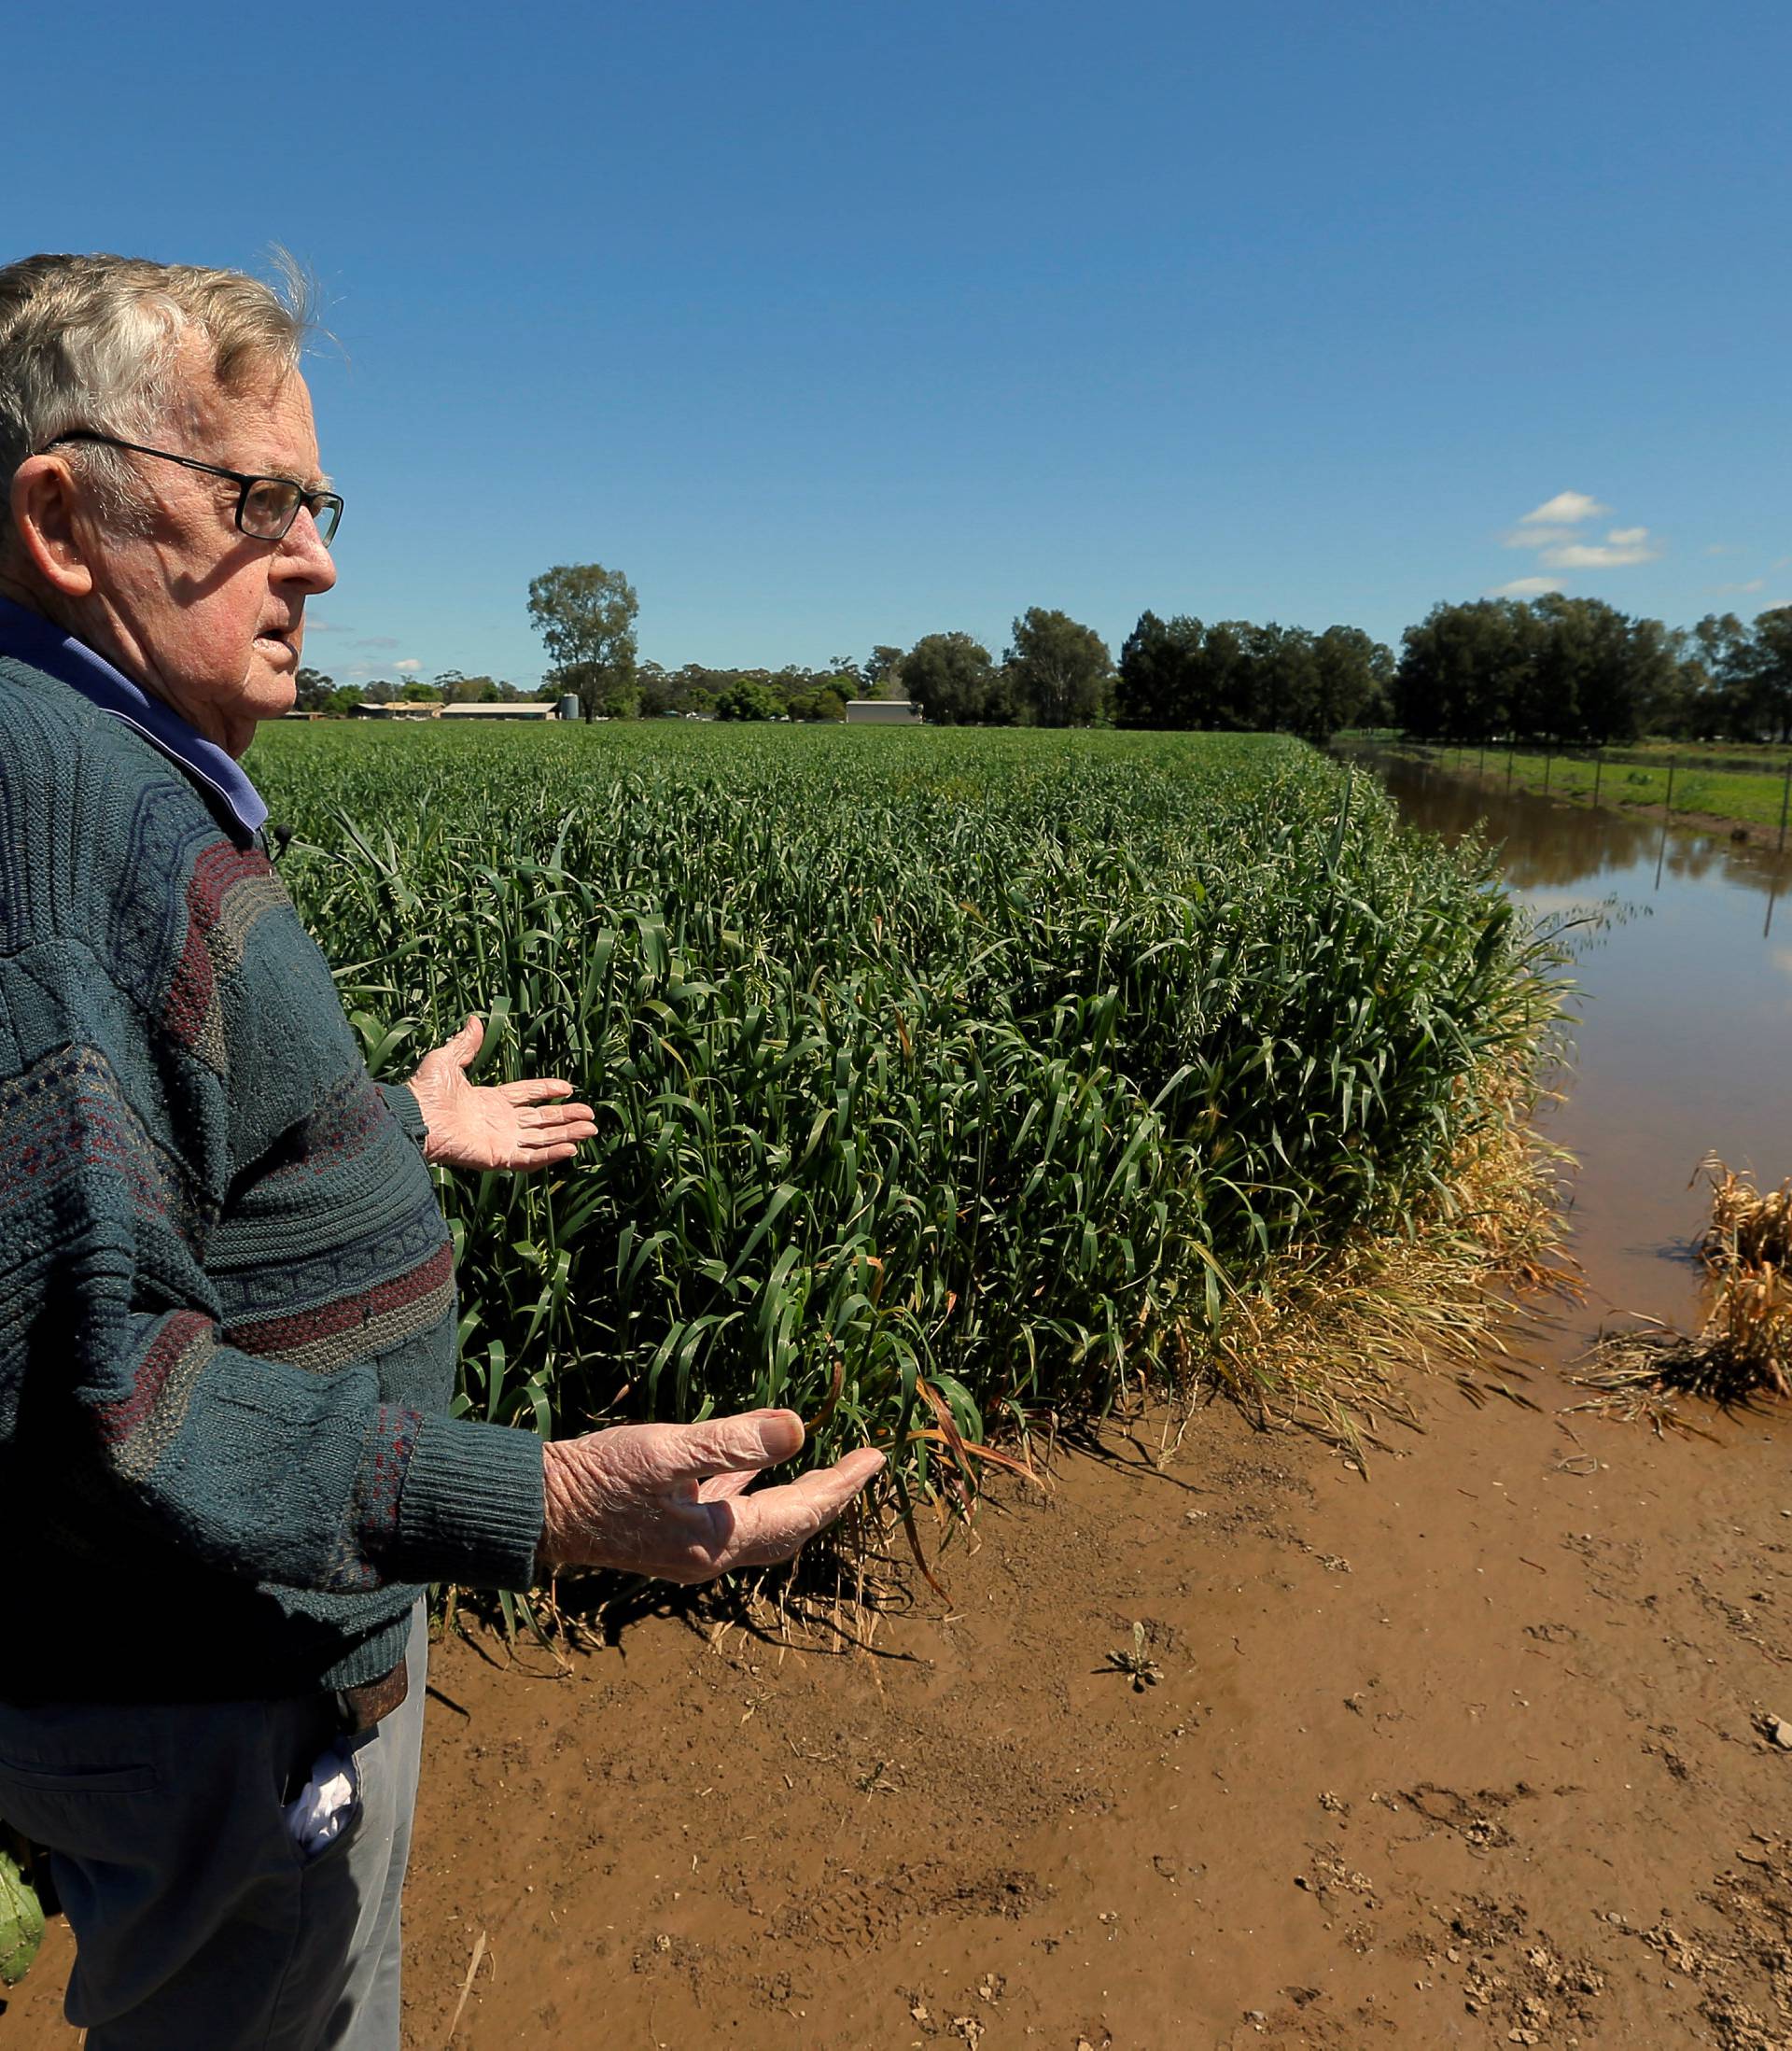 Australian farmer Leo Pietsch, 87, inspects his flooded oat crop after travelling via tractor through floodwaters to his stranded property, following heavy rainfall in the midwestern New South Wales town of Forbes